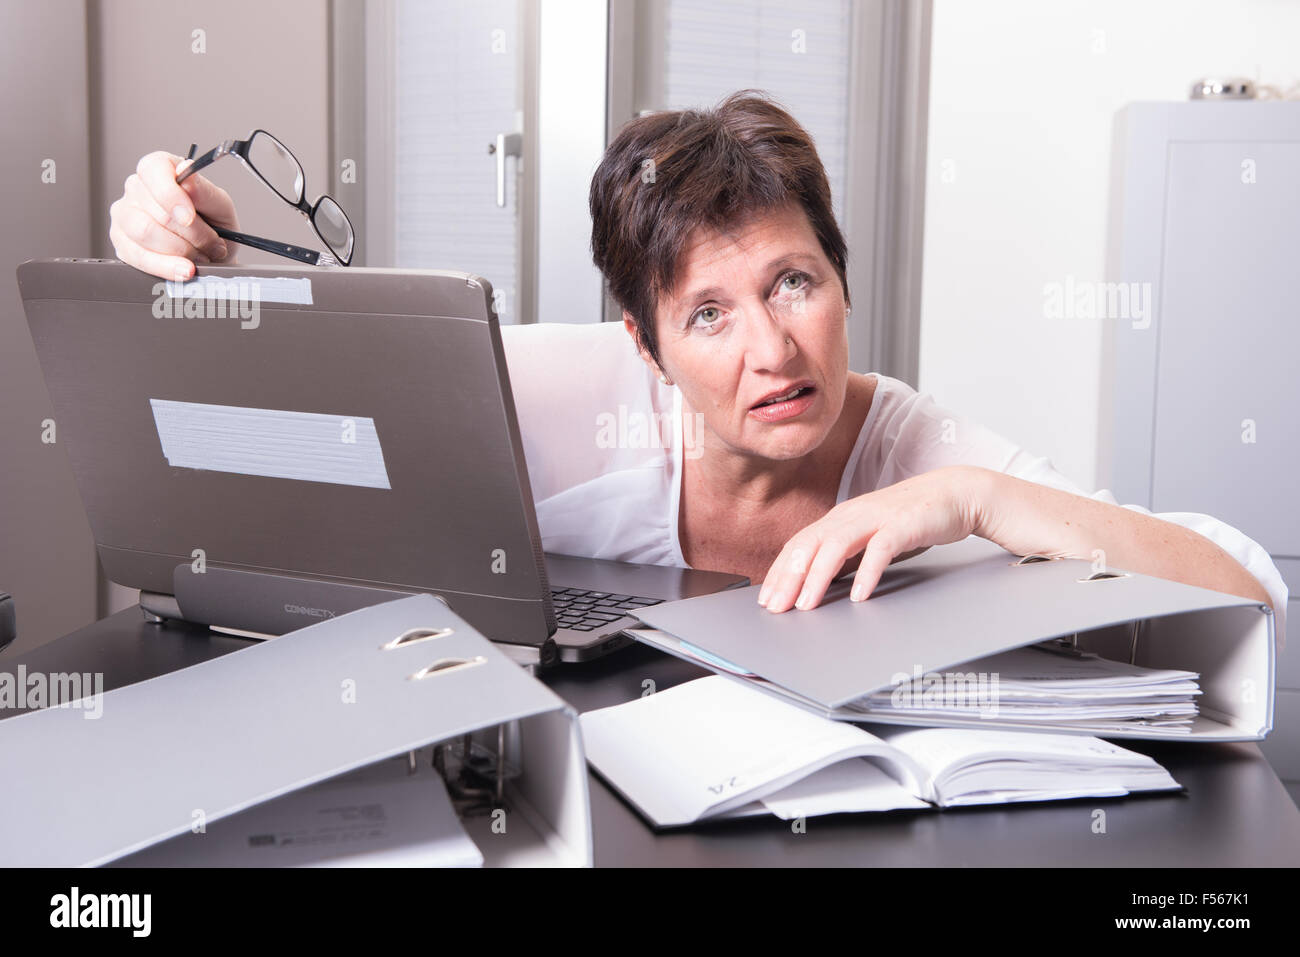 woman in her homeoffice is completely overworked Stock Photo